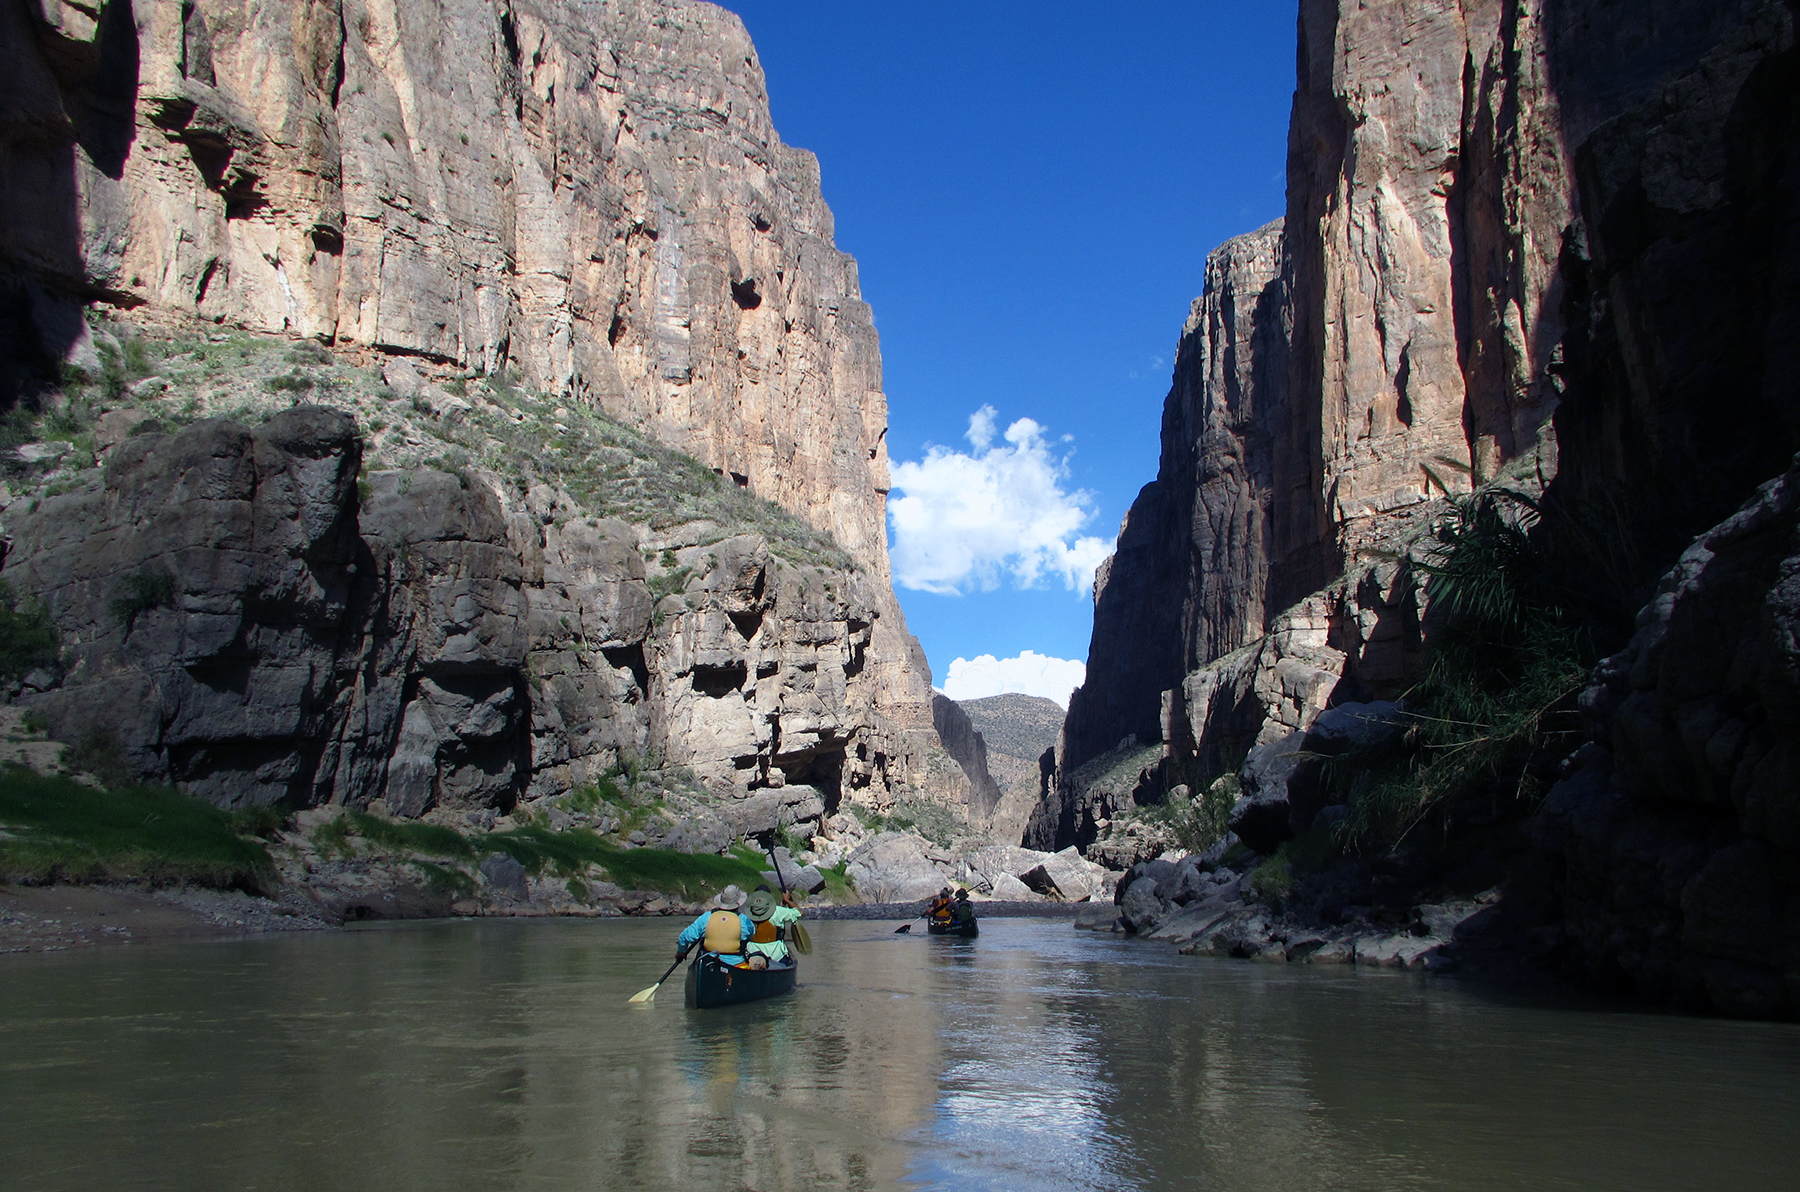 People in two canoes paddle on a river threading through high canyon walls.